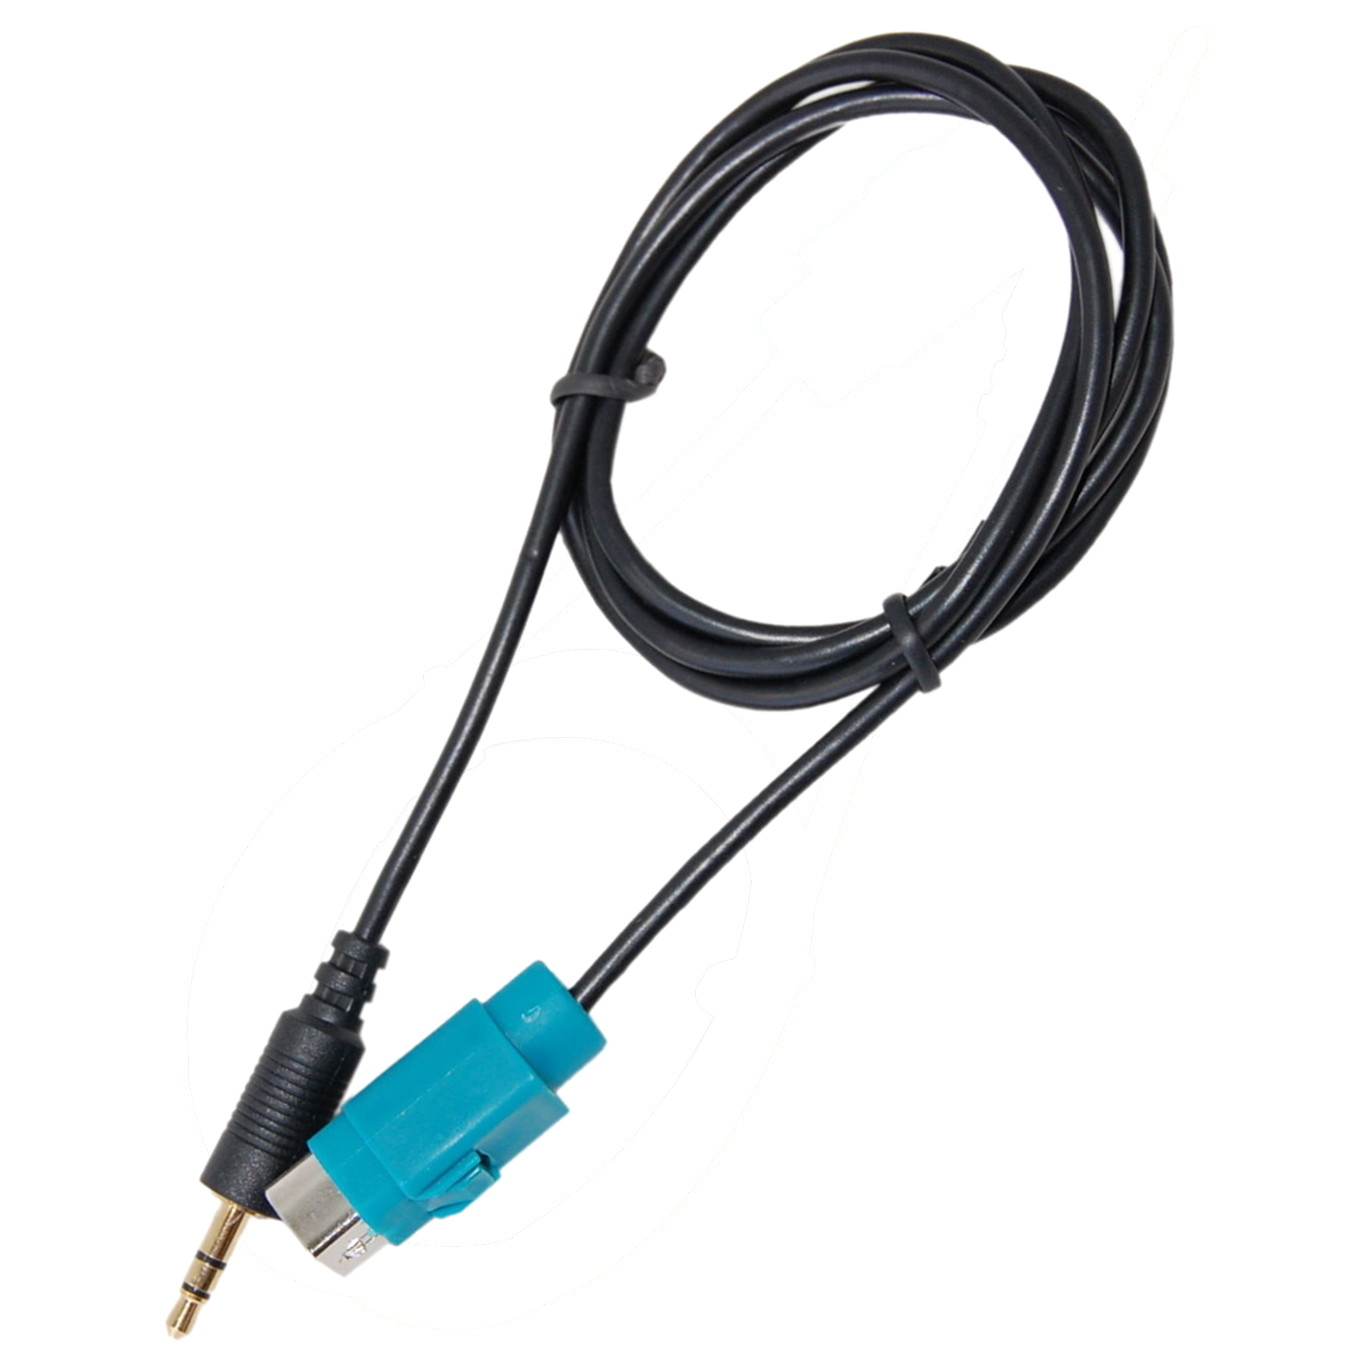 HQRP Mini Jack Full Speed Cable for Alpine CDE-9880R / CDE-9882Ri / CDE-9872R / CDE-9872RM - image 1 of 4